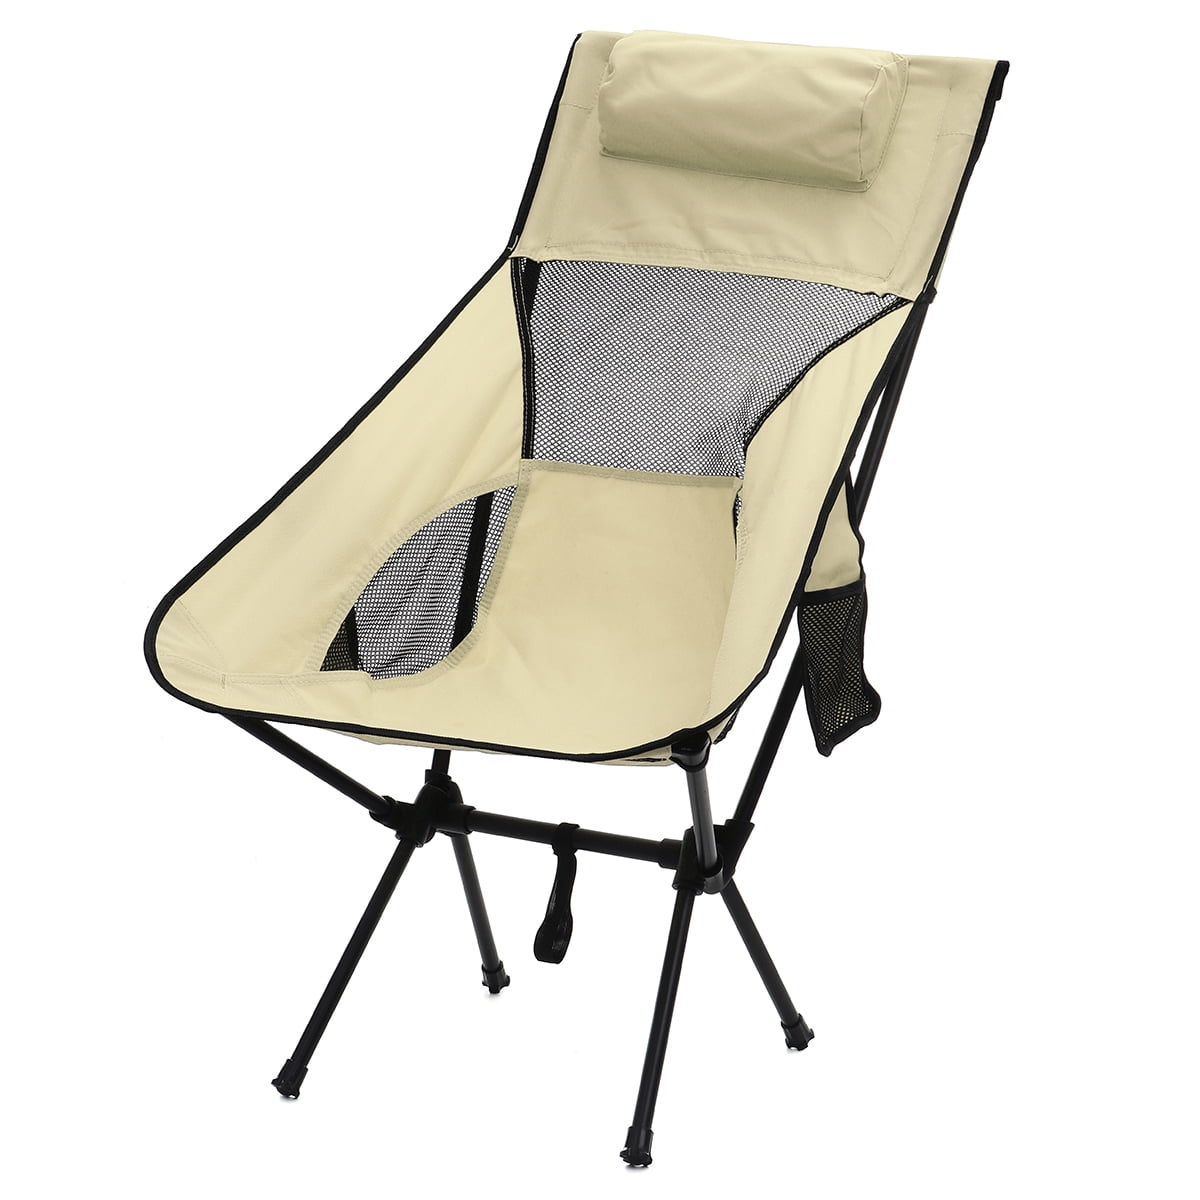 1xFolding Camping Chair Festival Garden Foldable Fold Up Seat Deck Fishing Stool 